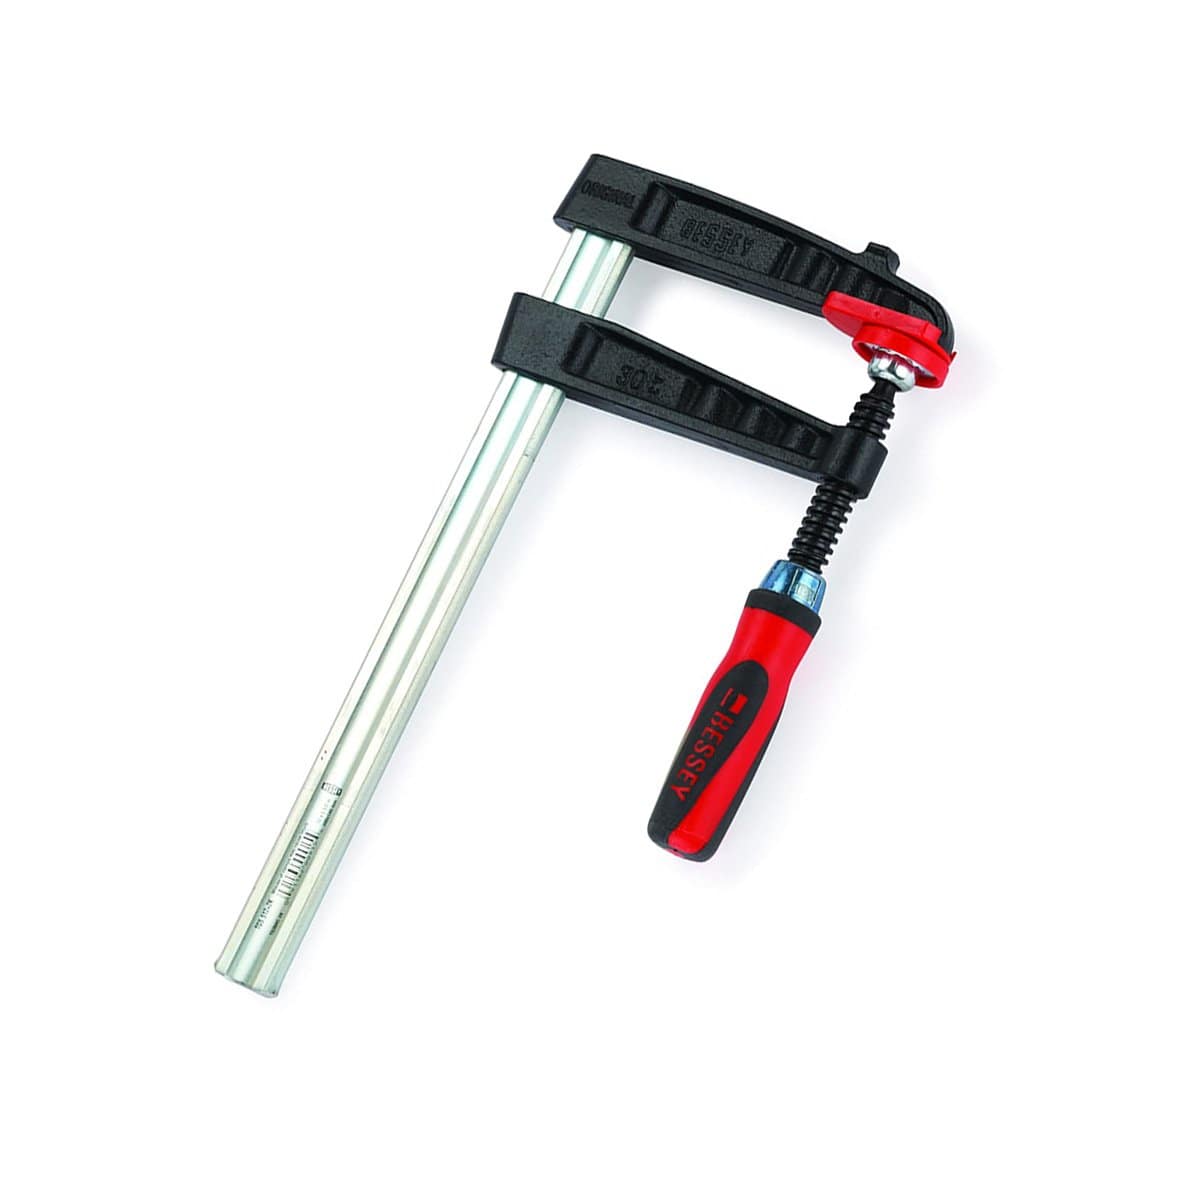 Bessey Tools TG5.512+2K Clamp 5.5" x 12" Cast Iron Bar Clamp with 2K Handle